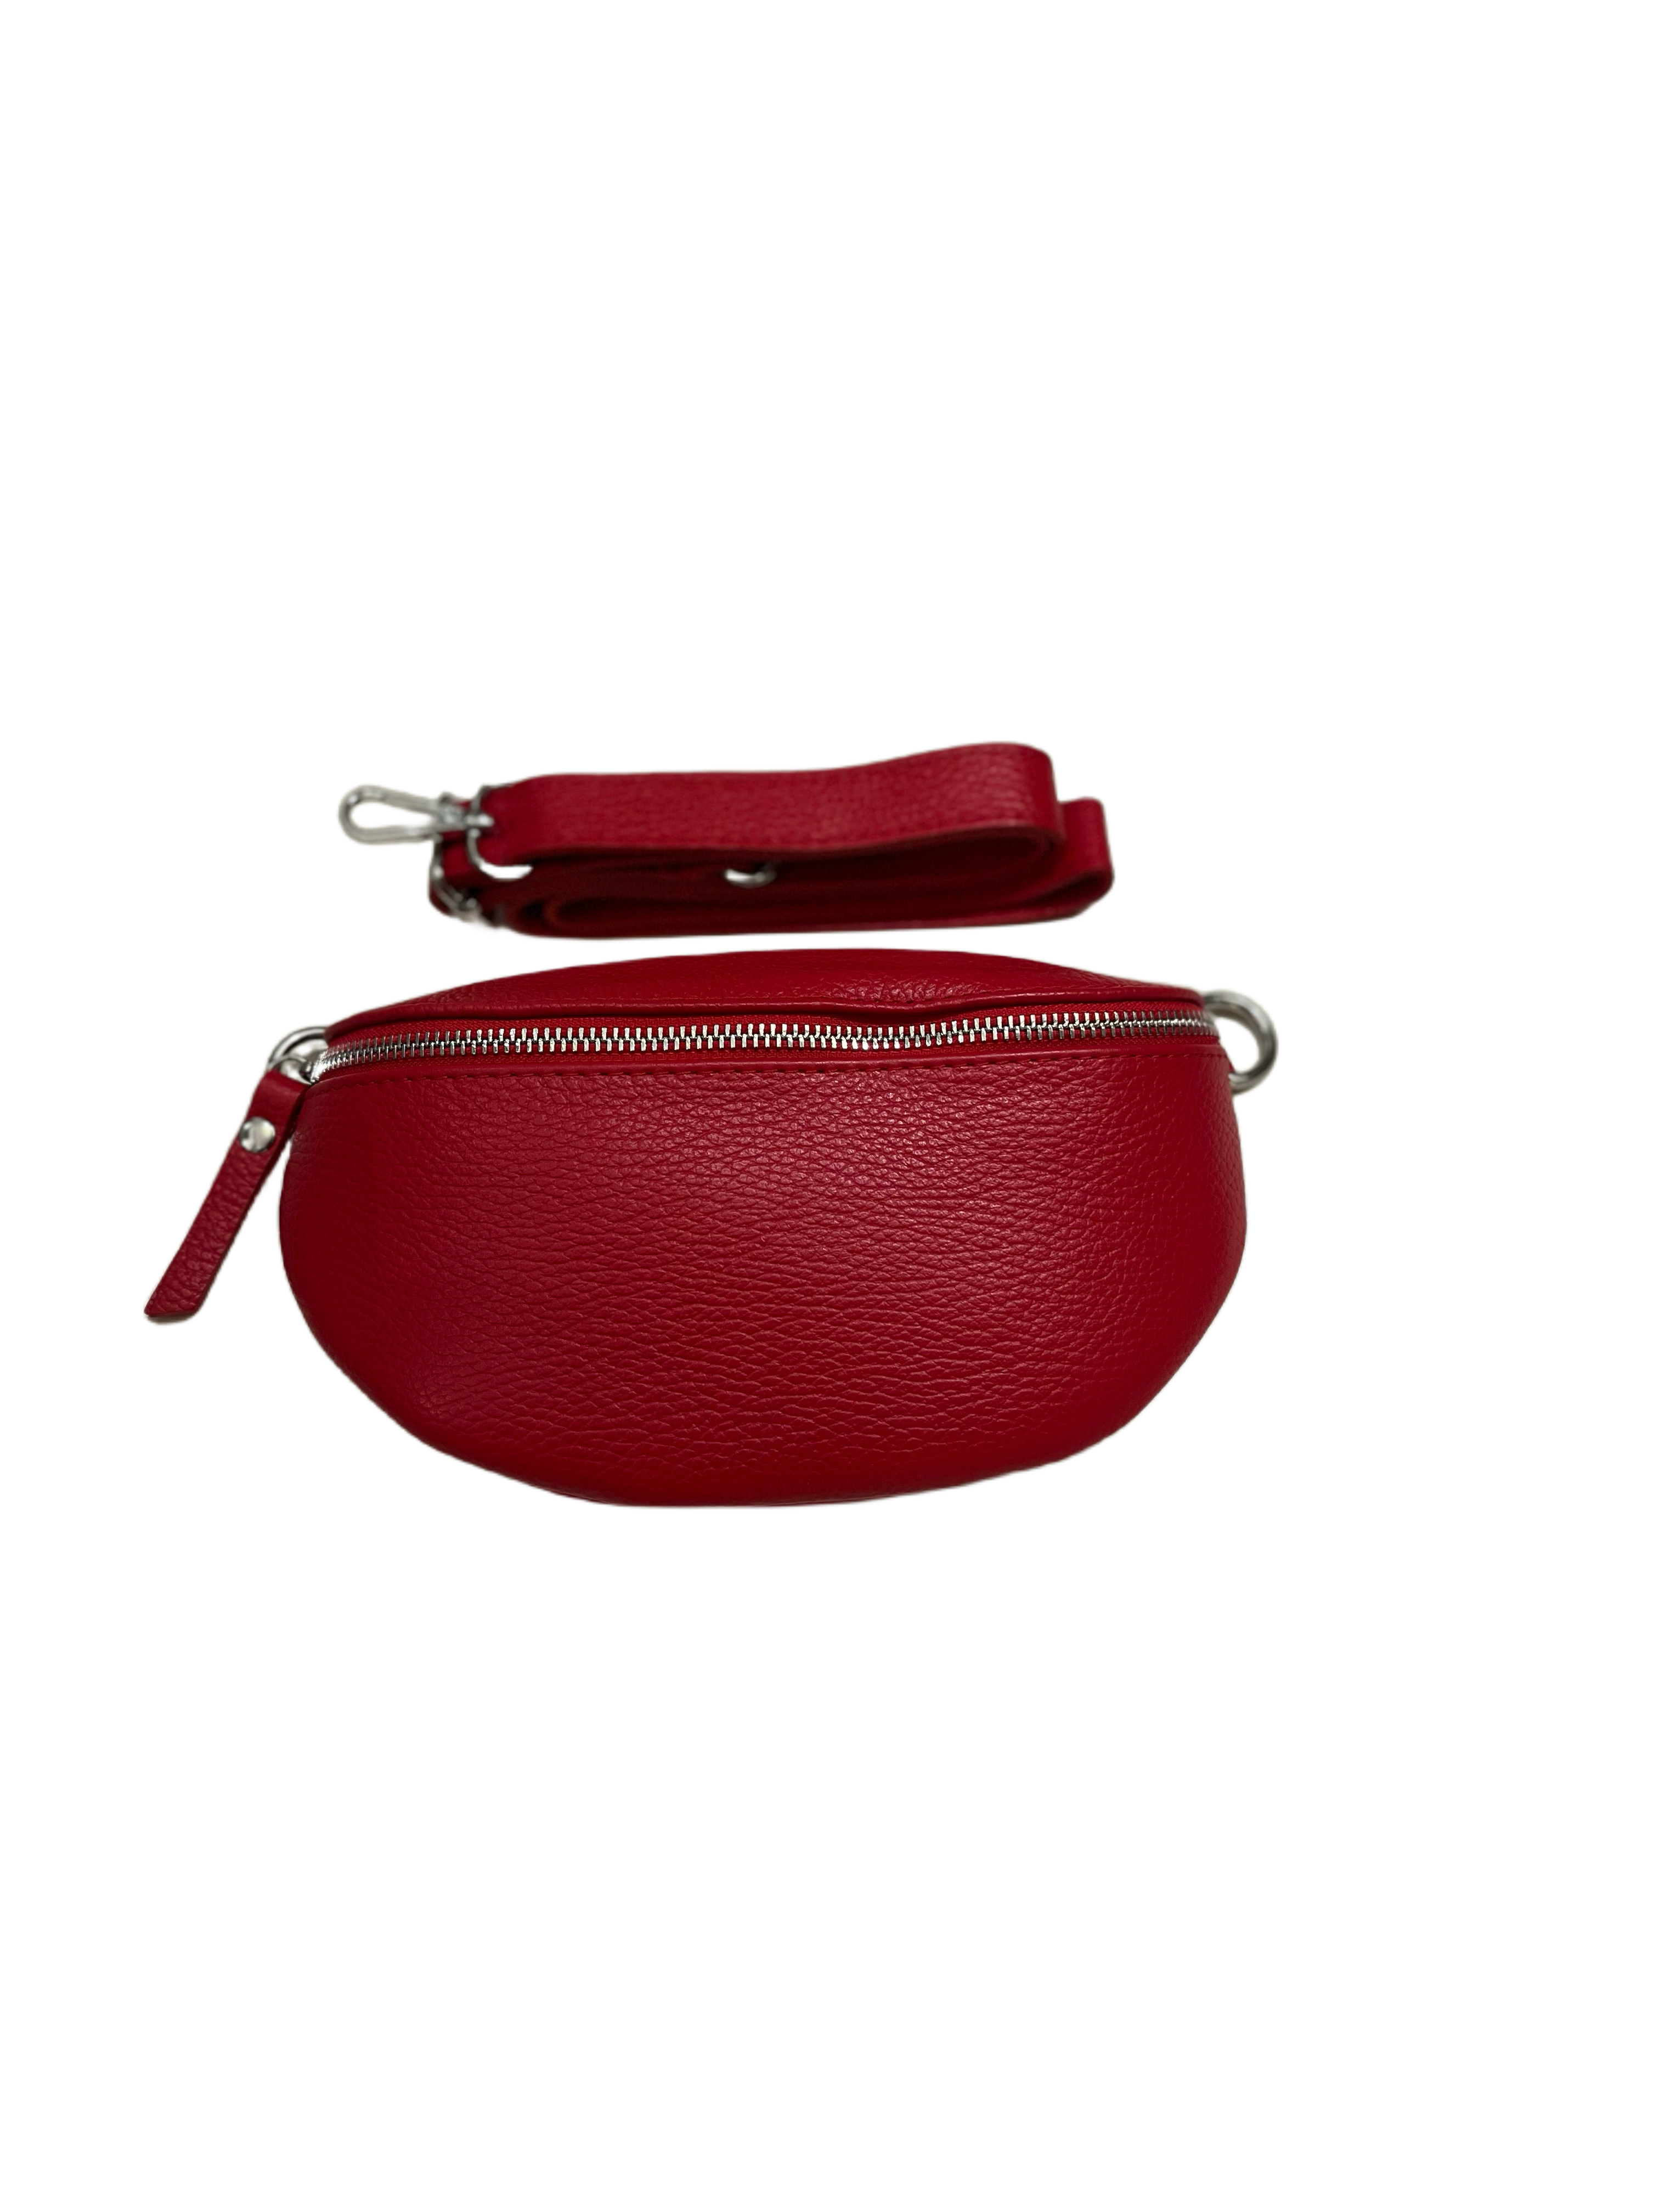 Bodella red hip genuine leather hip bag-made in italy